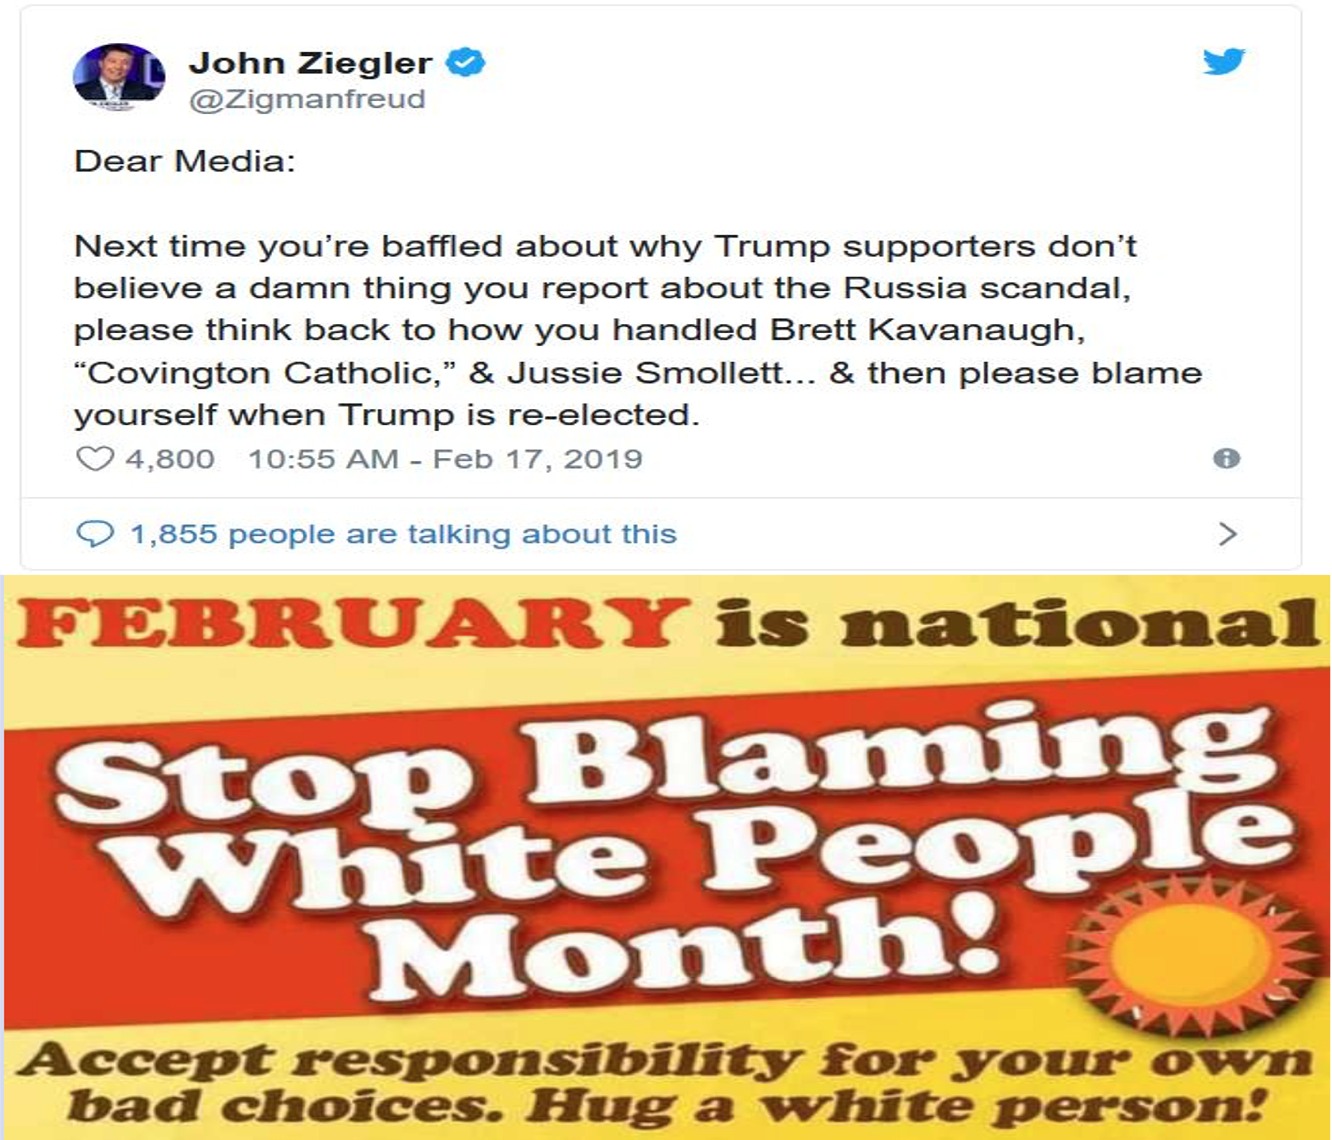 memes -  John Ziegler Dear Media Next time you're baffled about why Trump supporters don't believe a damn thing you report about the Russia scandal, please think back to how you handled Brett Kavanaugh, Covington Catholic, & Jussie Smollett... & then plea